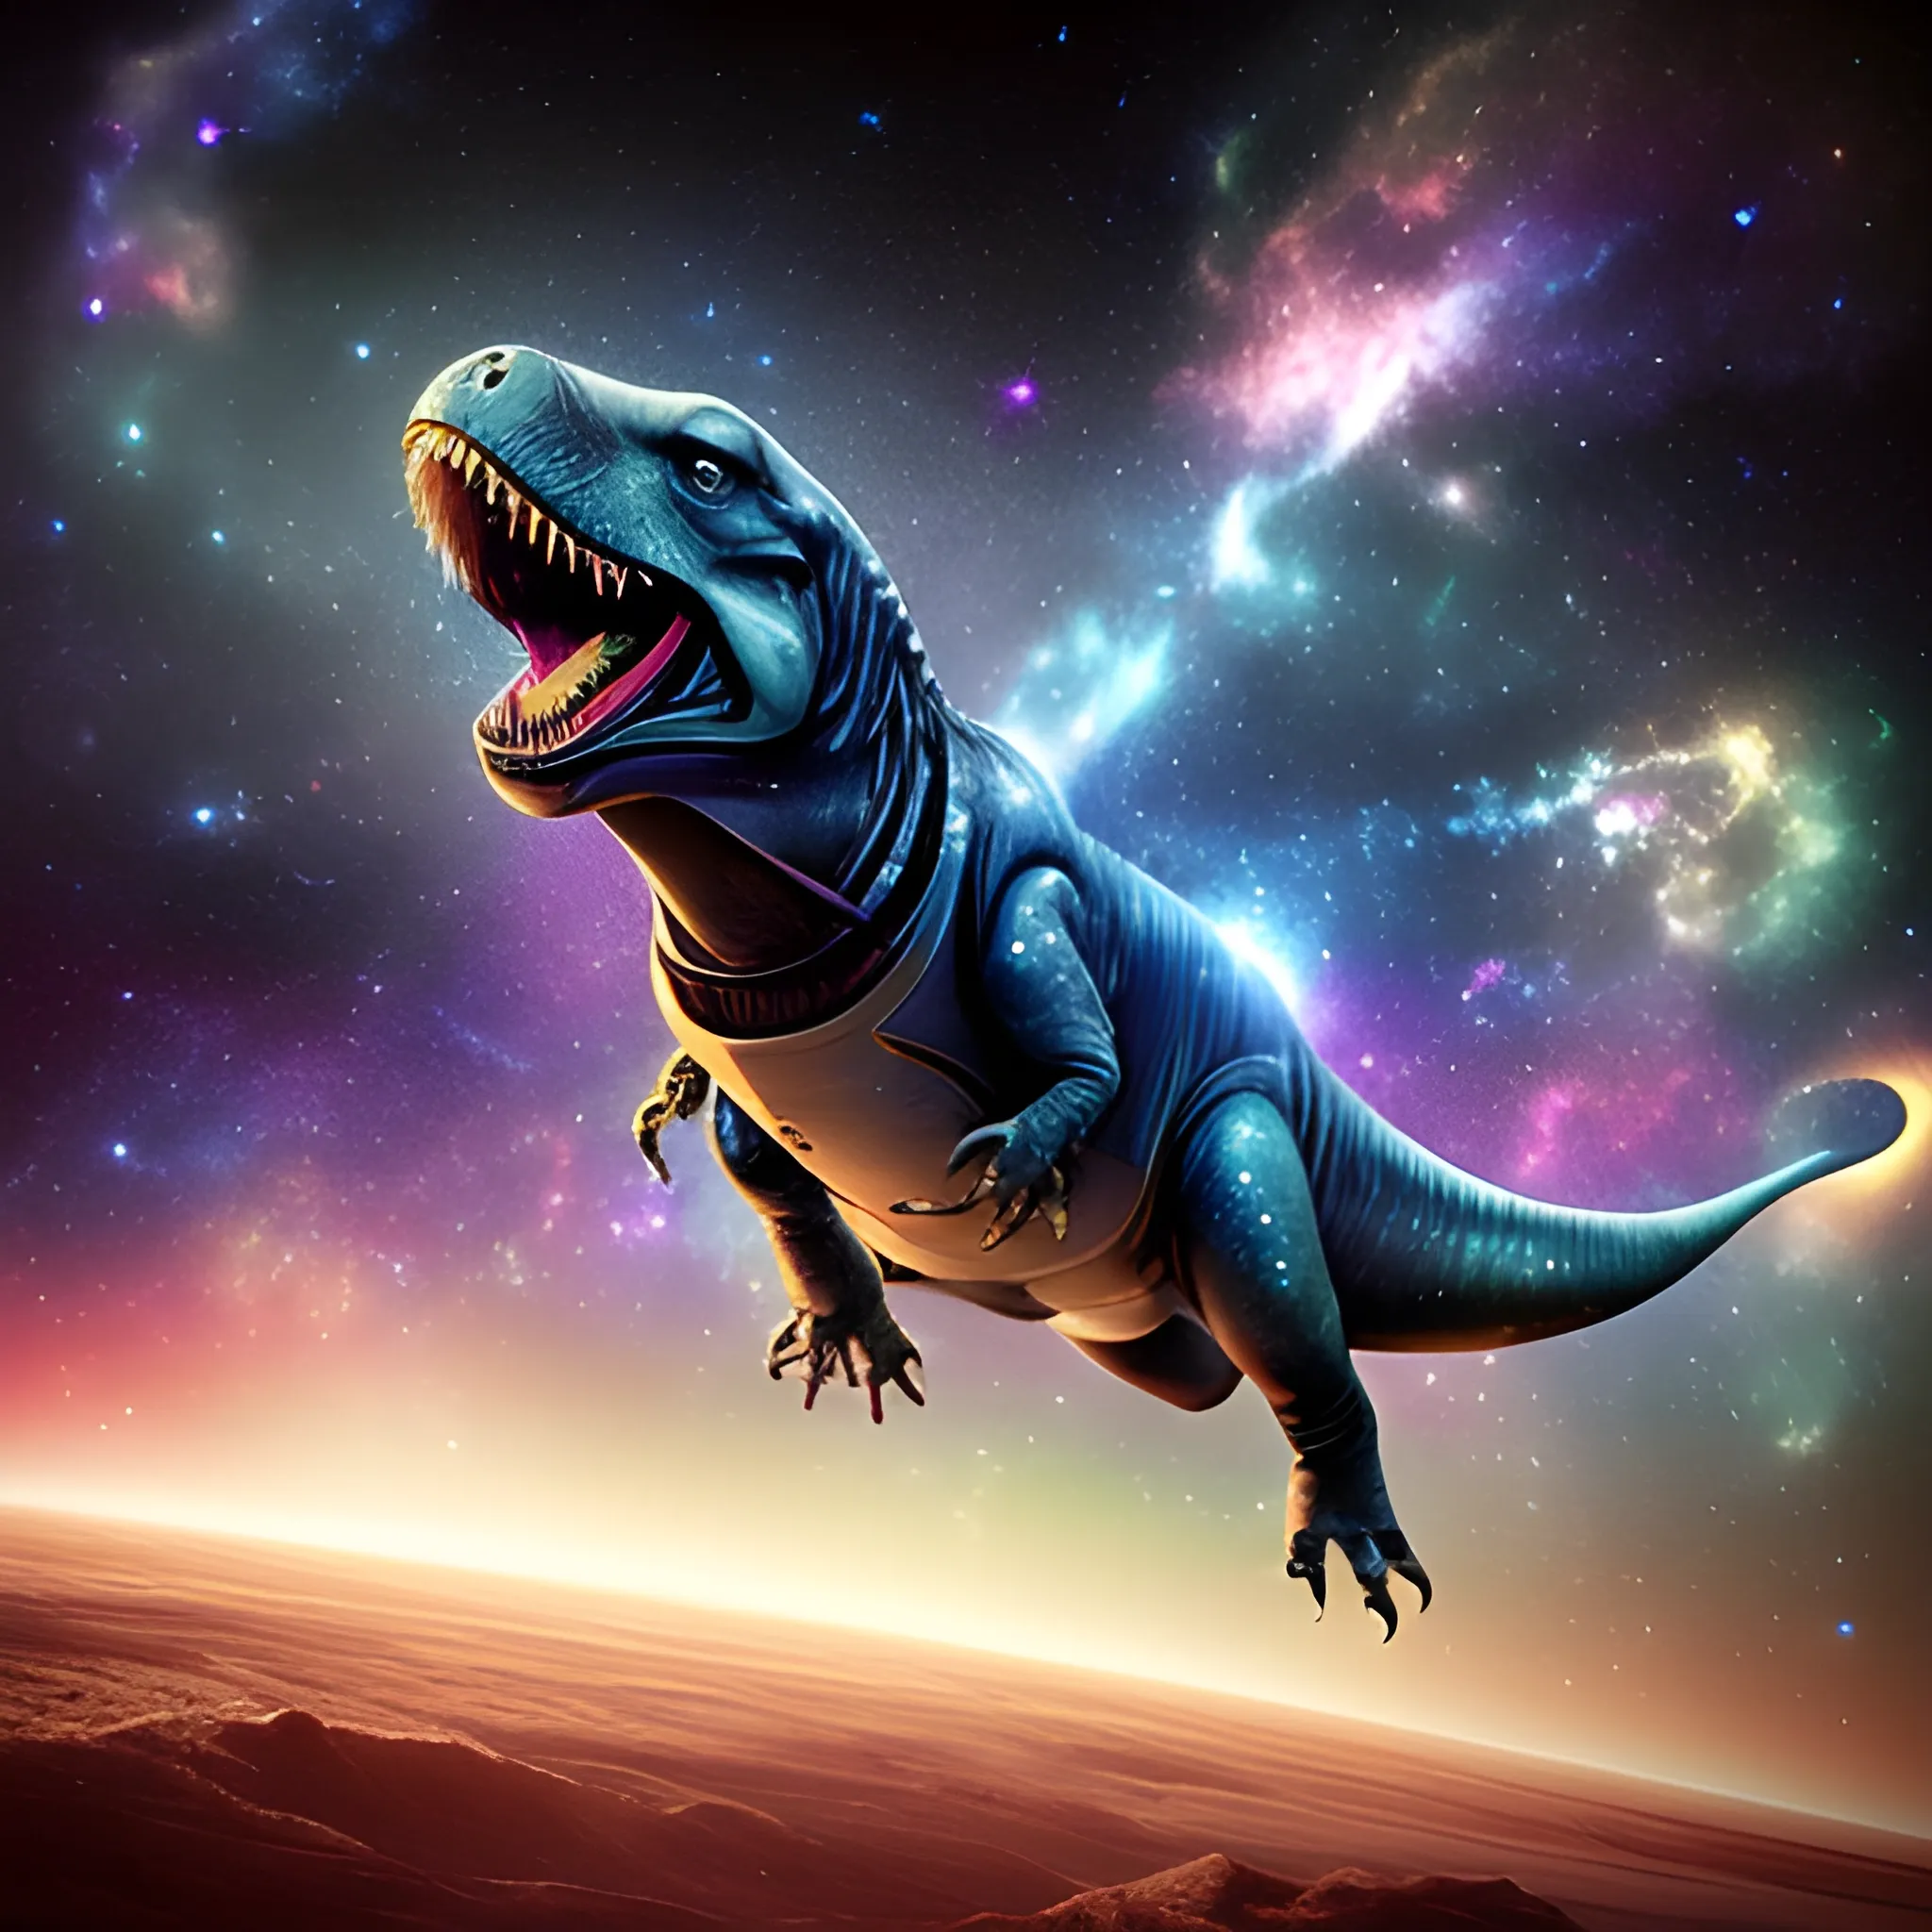 a beautiful picture of a space trex flying through the infinite cosmos with galaxies and stars in the background